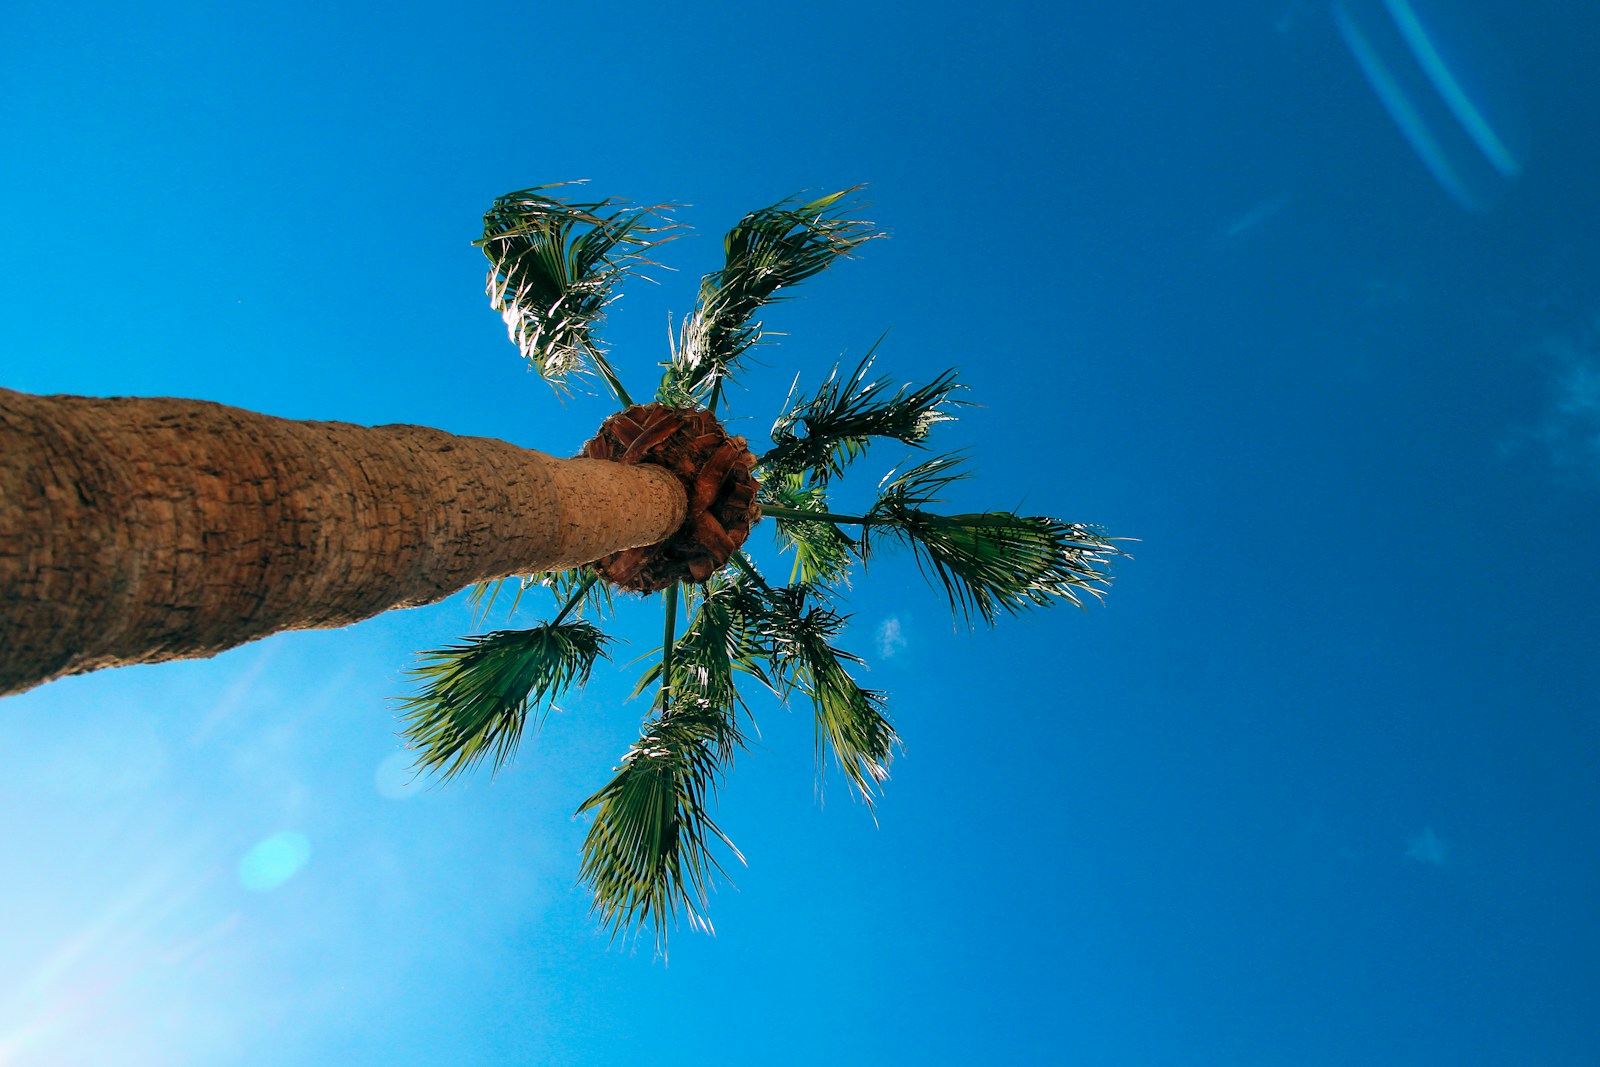 a palm tree with a blue sky in the background